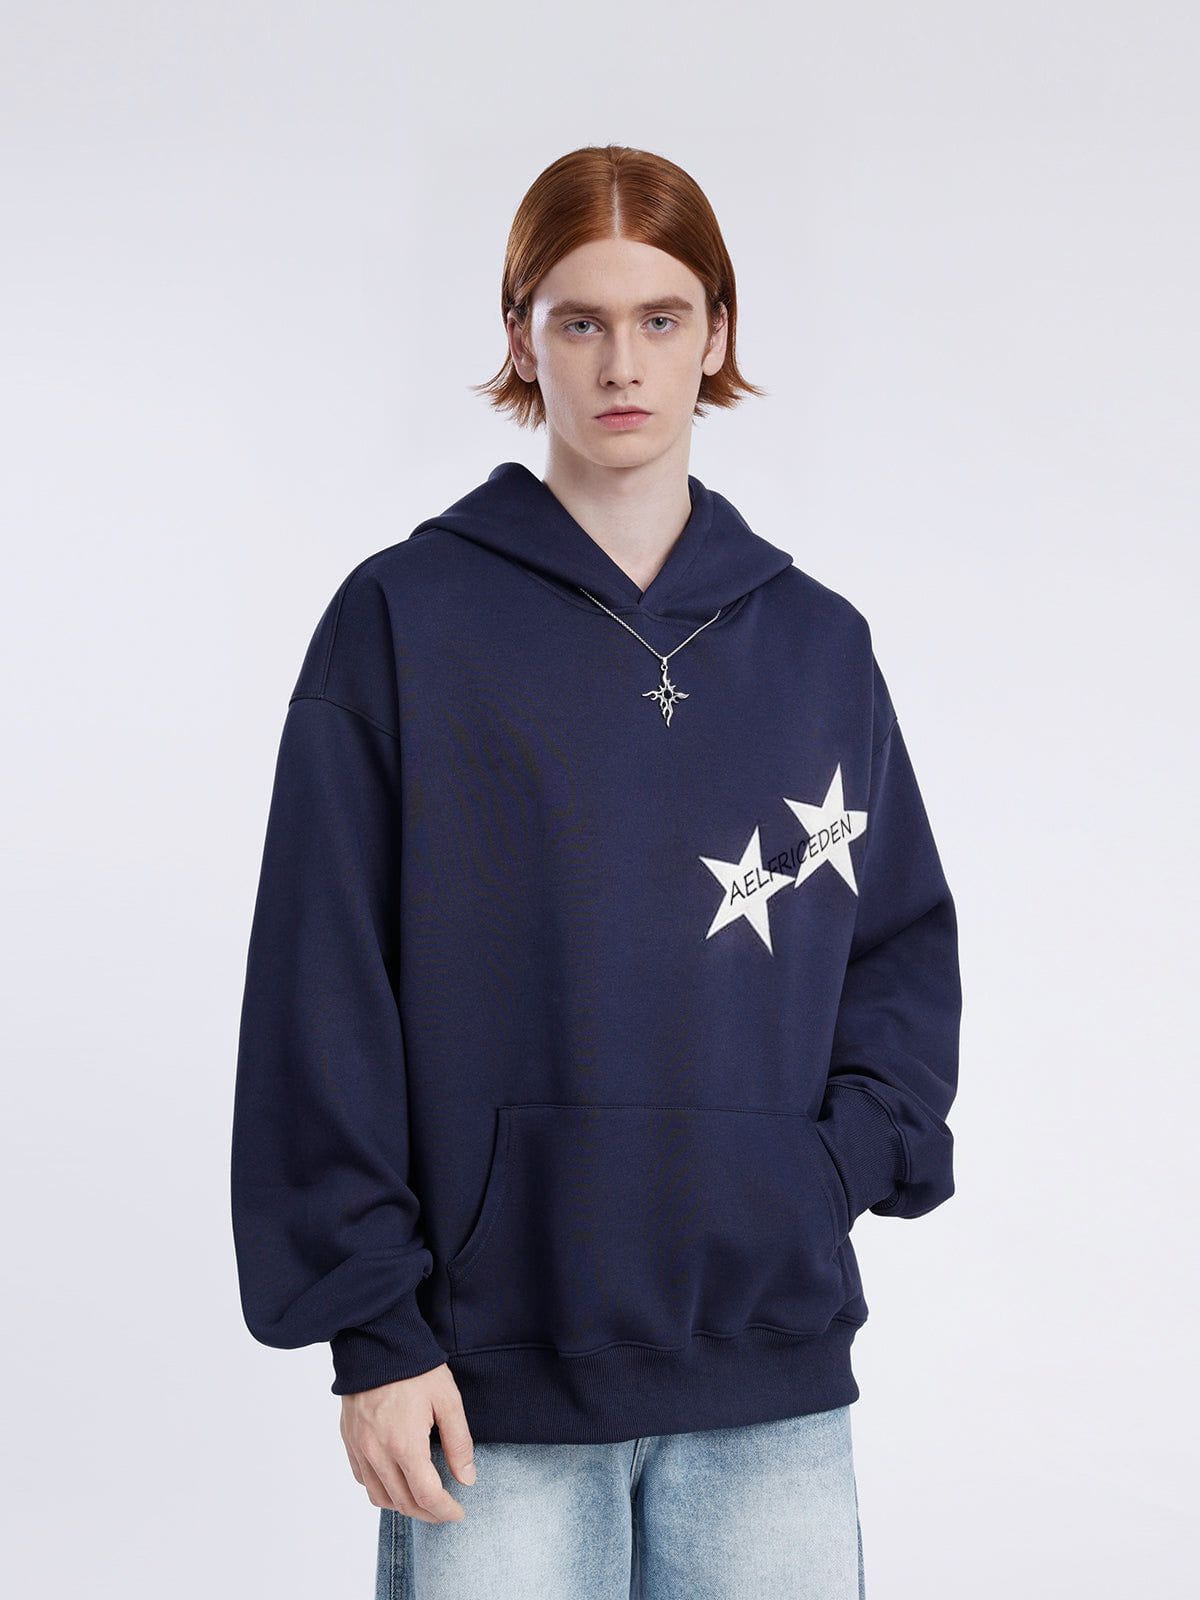 Aelfric Eden Star Print Color Contrast Hoodie [Recommended by @sundaykalo]